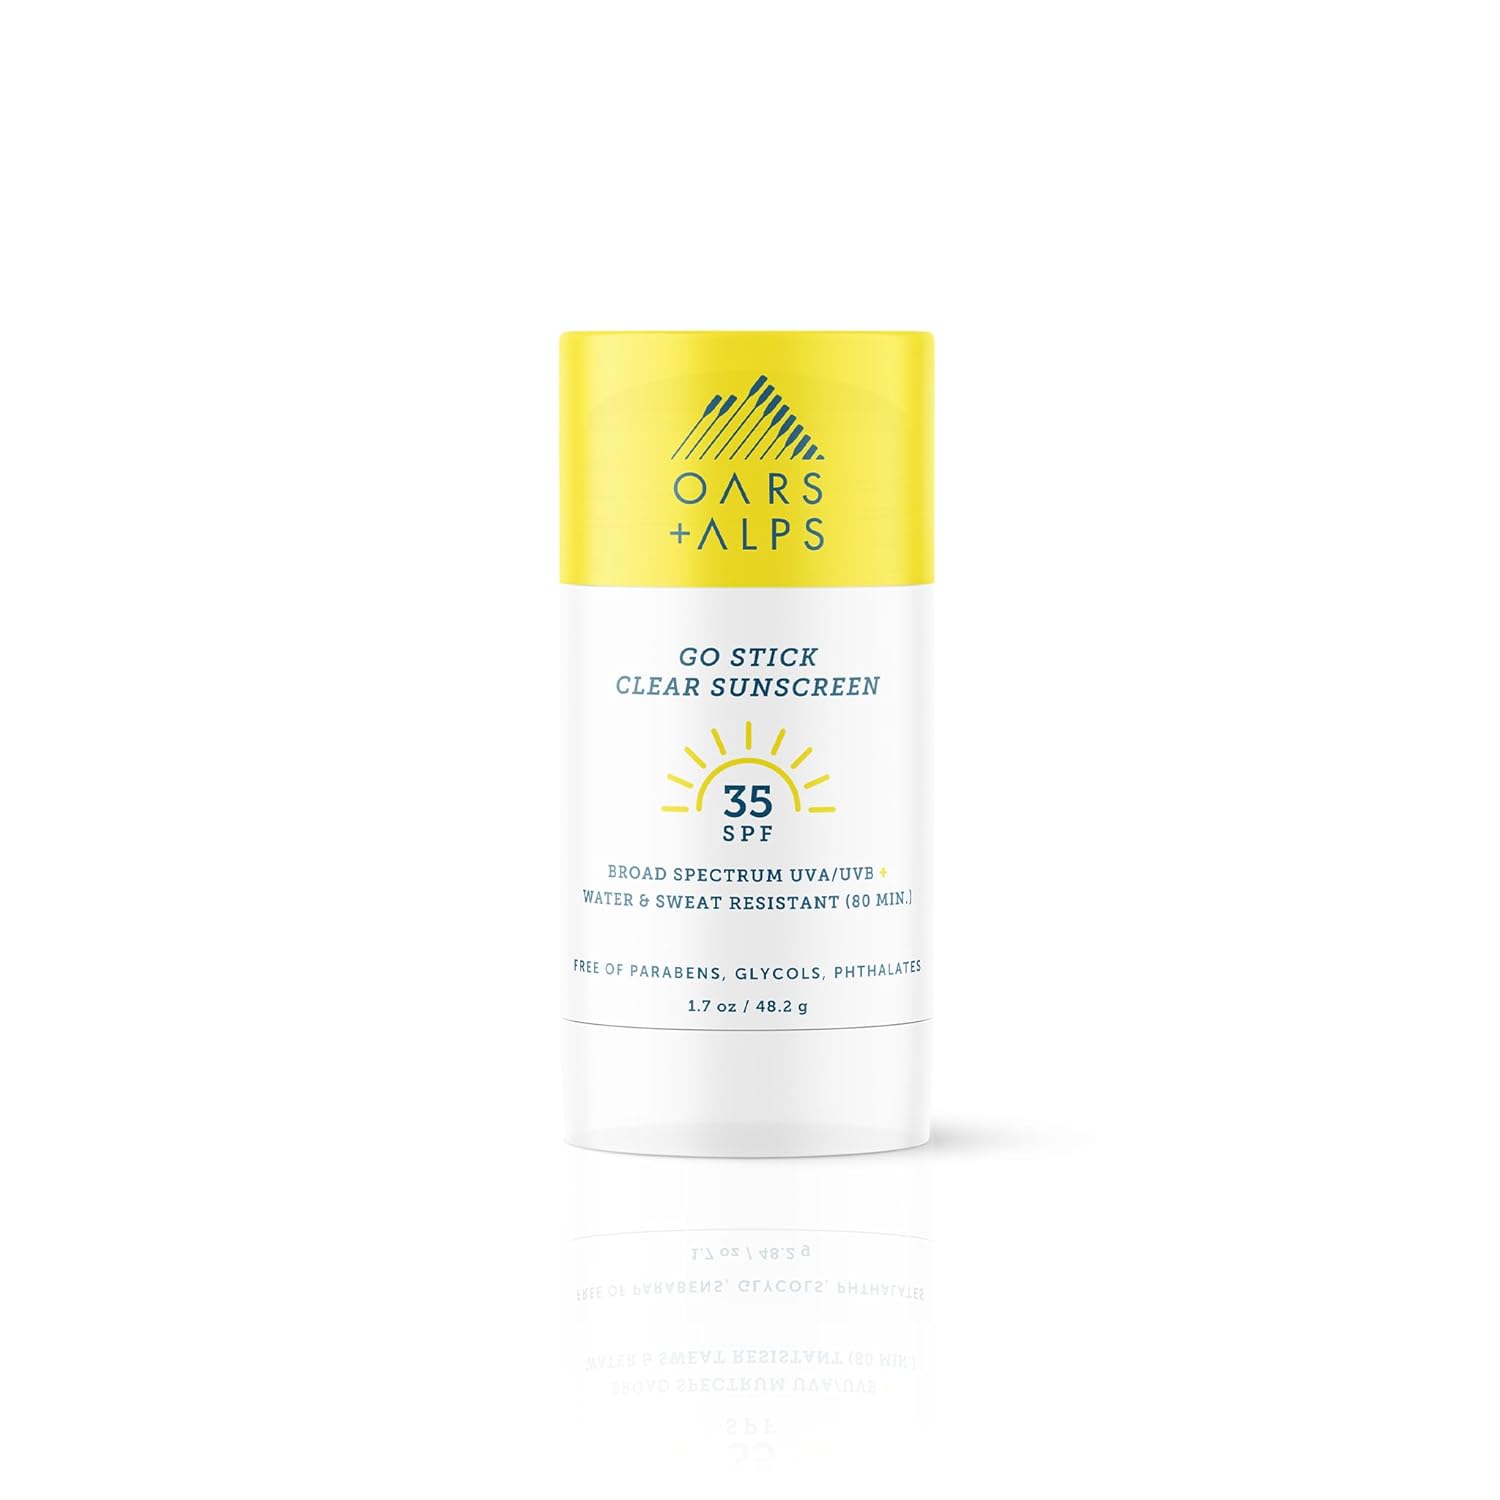 Oars + Alps Go Stick Clear SPF 35 Face Sunscreen, Skin Care Infused with Vitamin E and Antioxidants, Water and Sweat Resistant, TSA Friendly, 1.7 Oz, 1 Pack